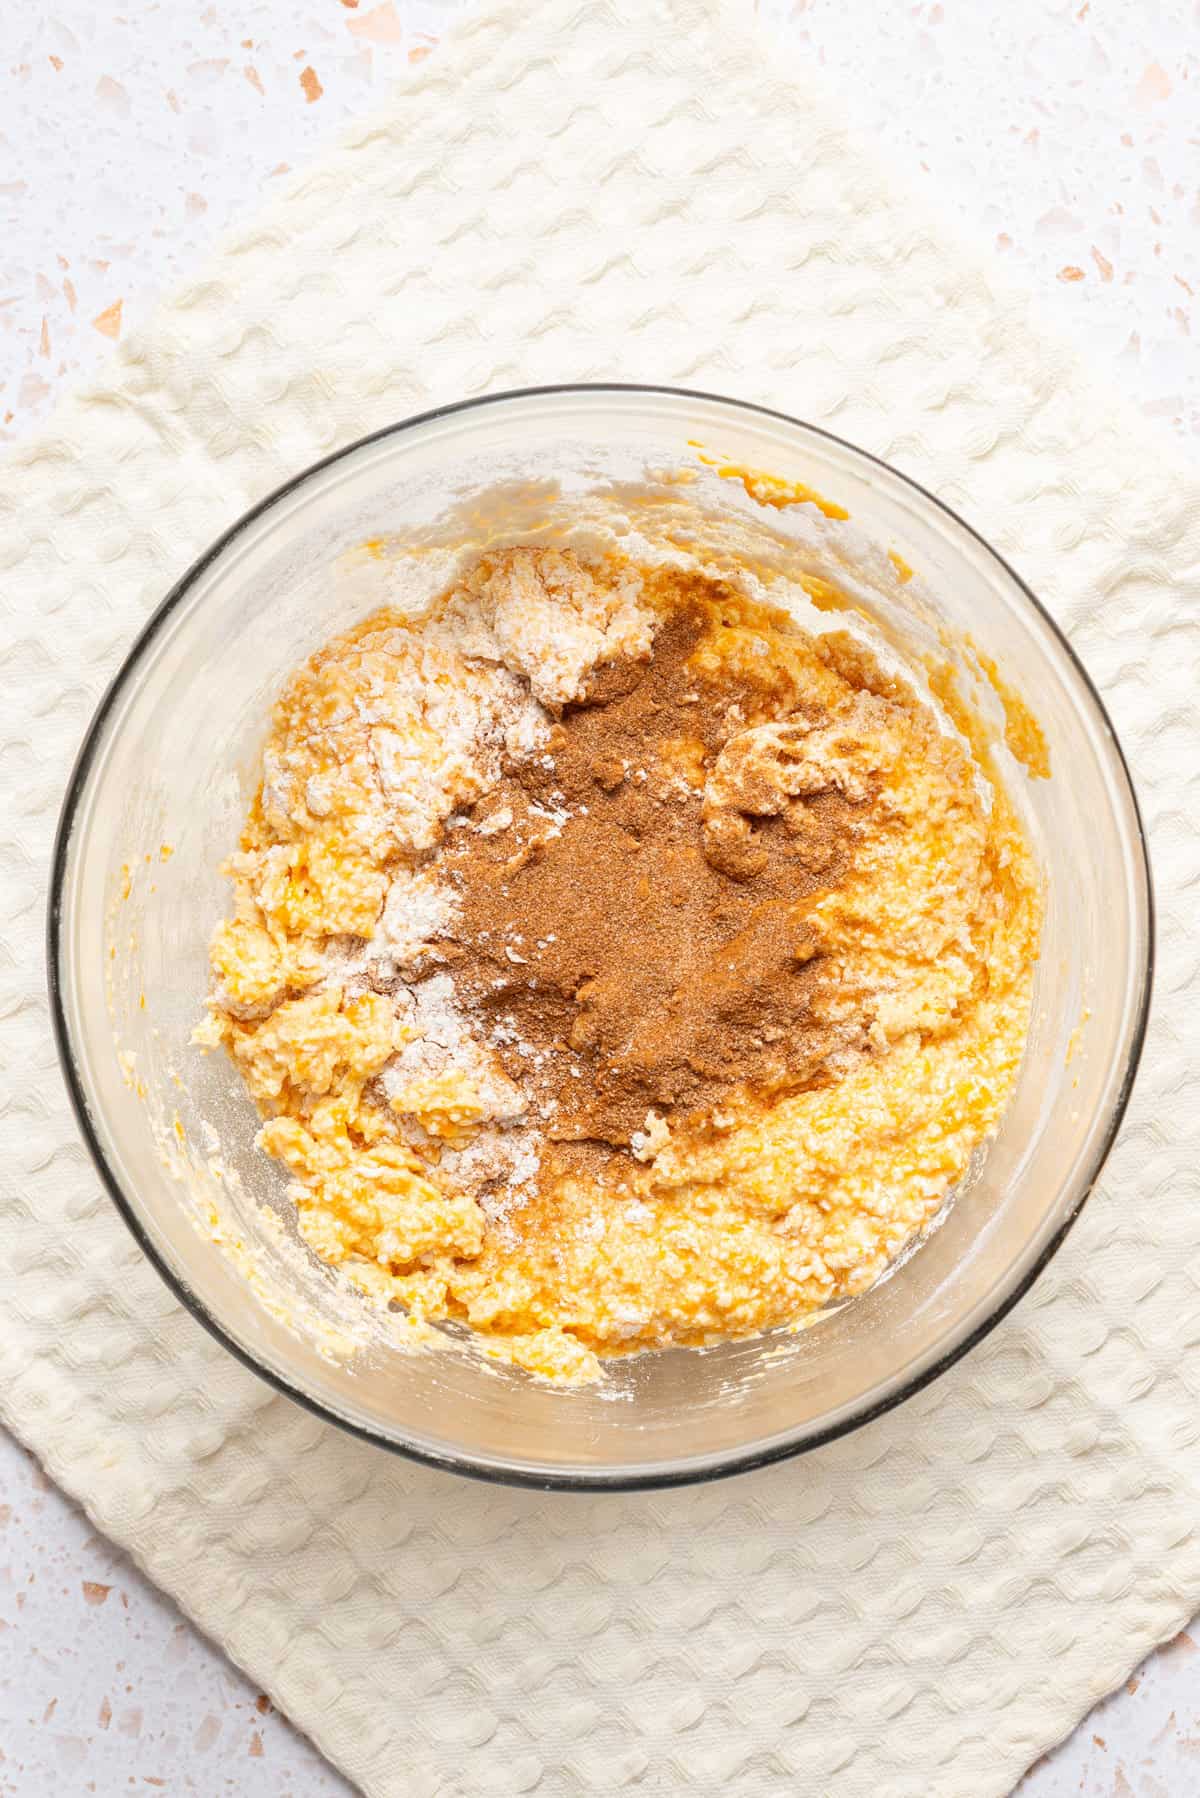 An image of flour, baking powder, and pumpkin spice being added to a mixing bowl.